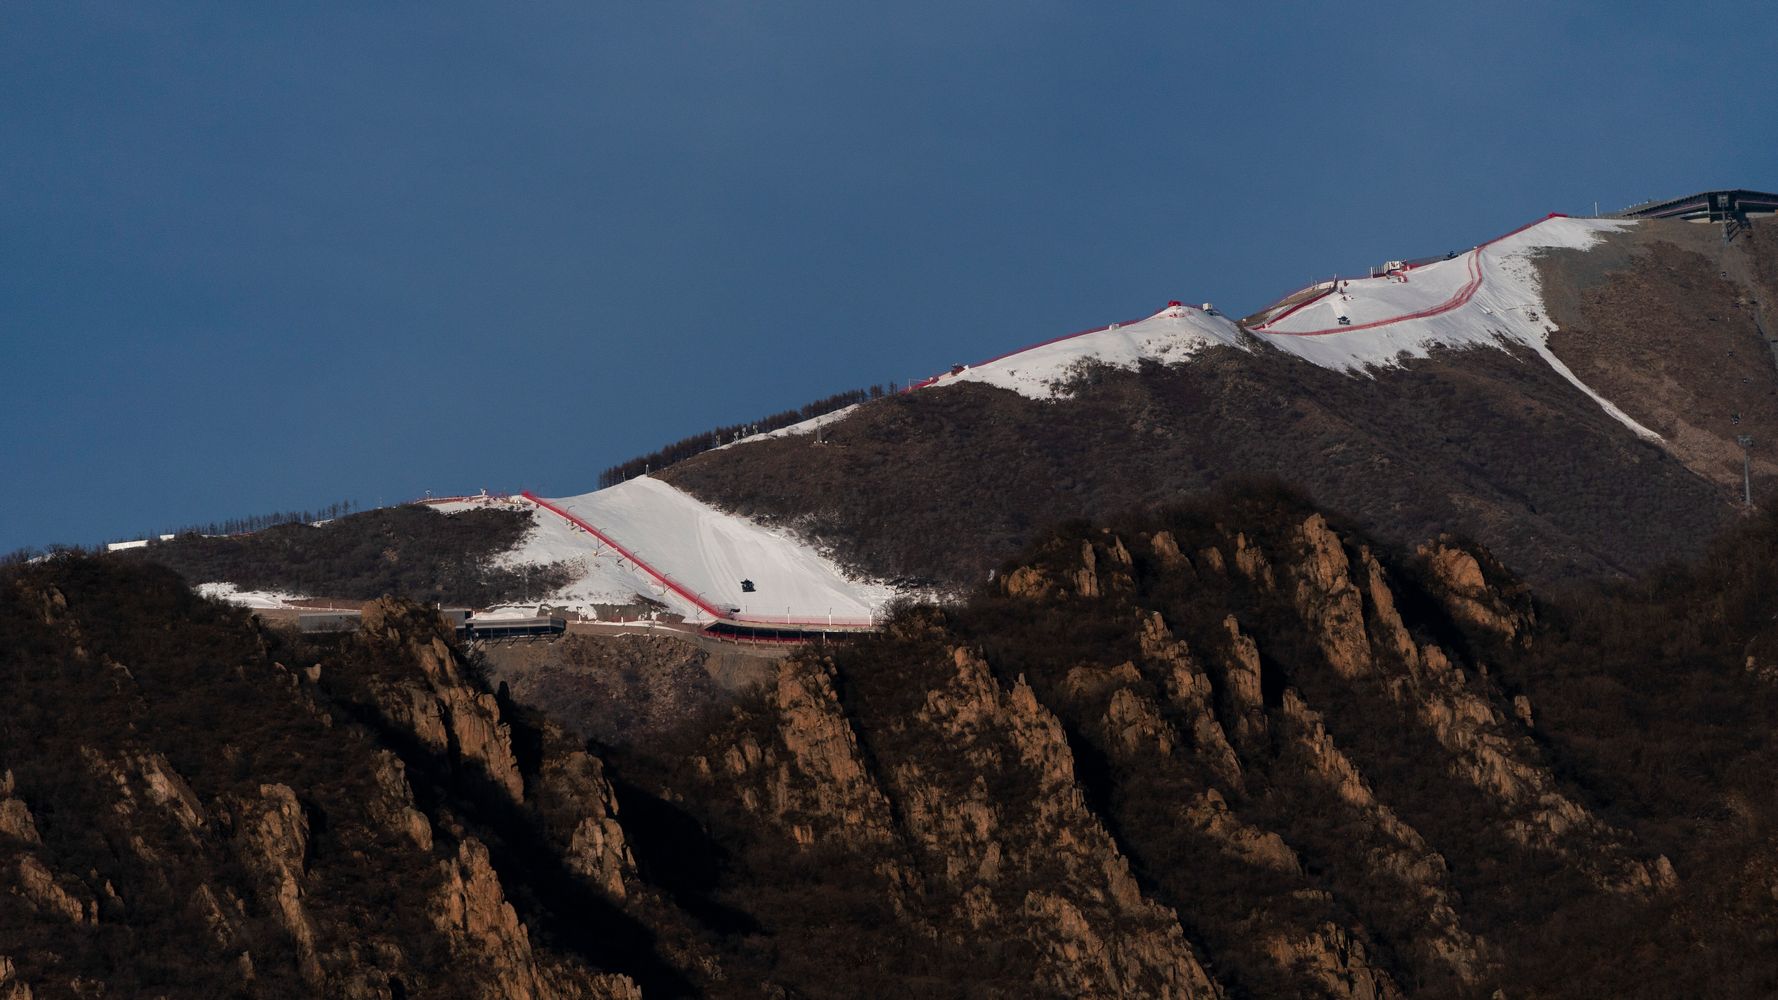 Winter Weather Disappears From Winter Olympics And Athletes Worry